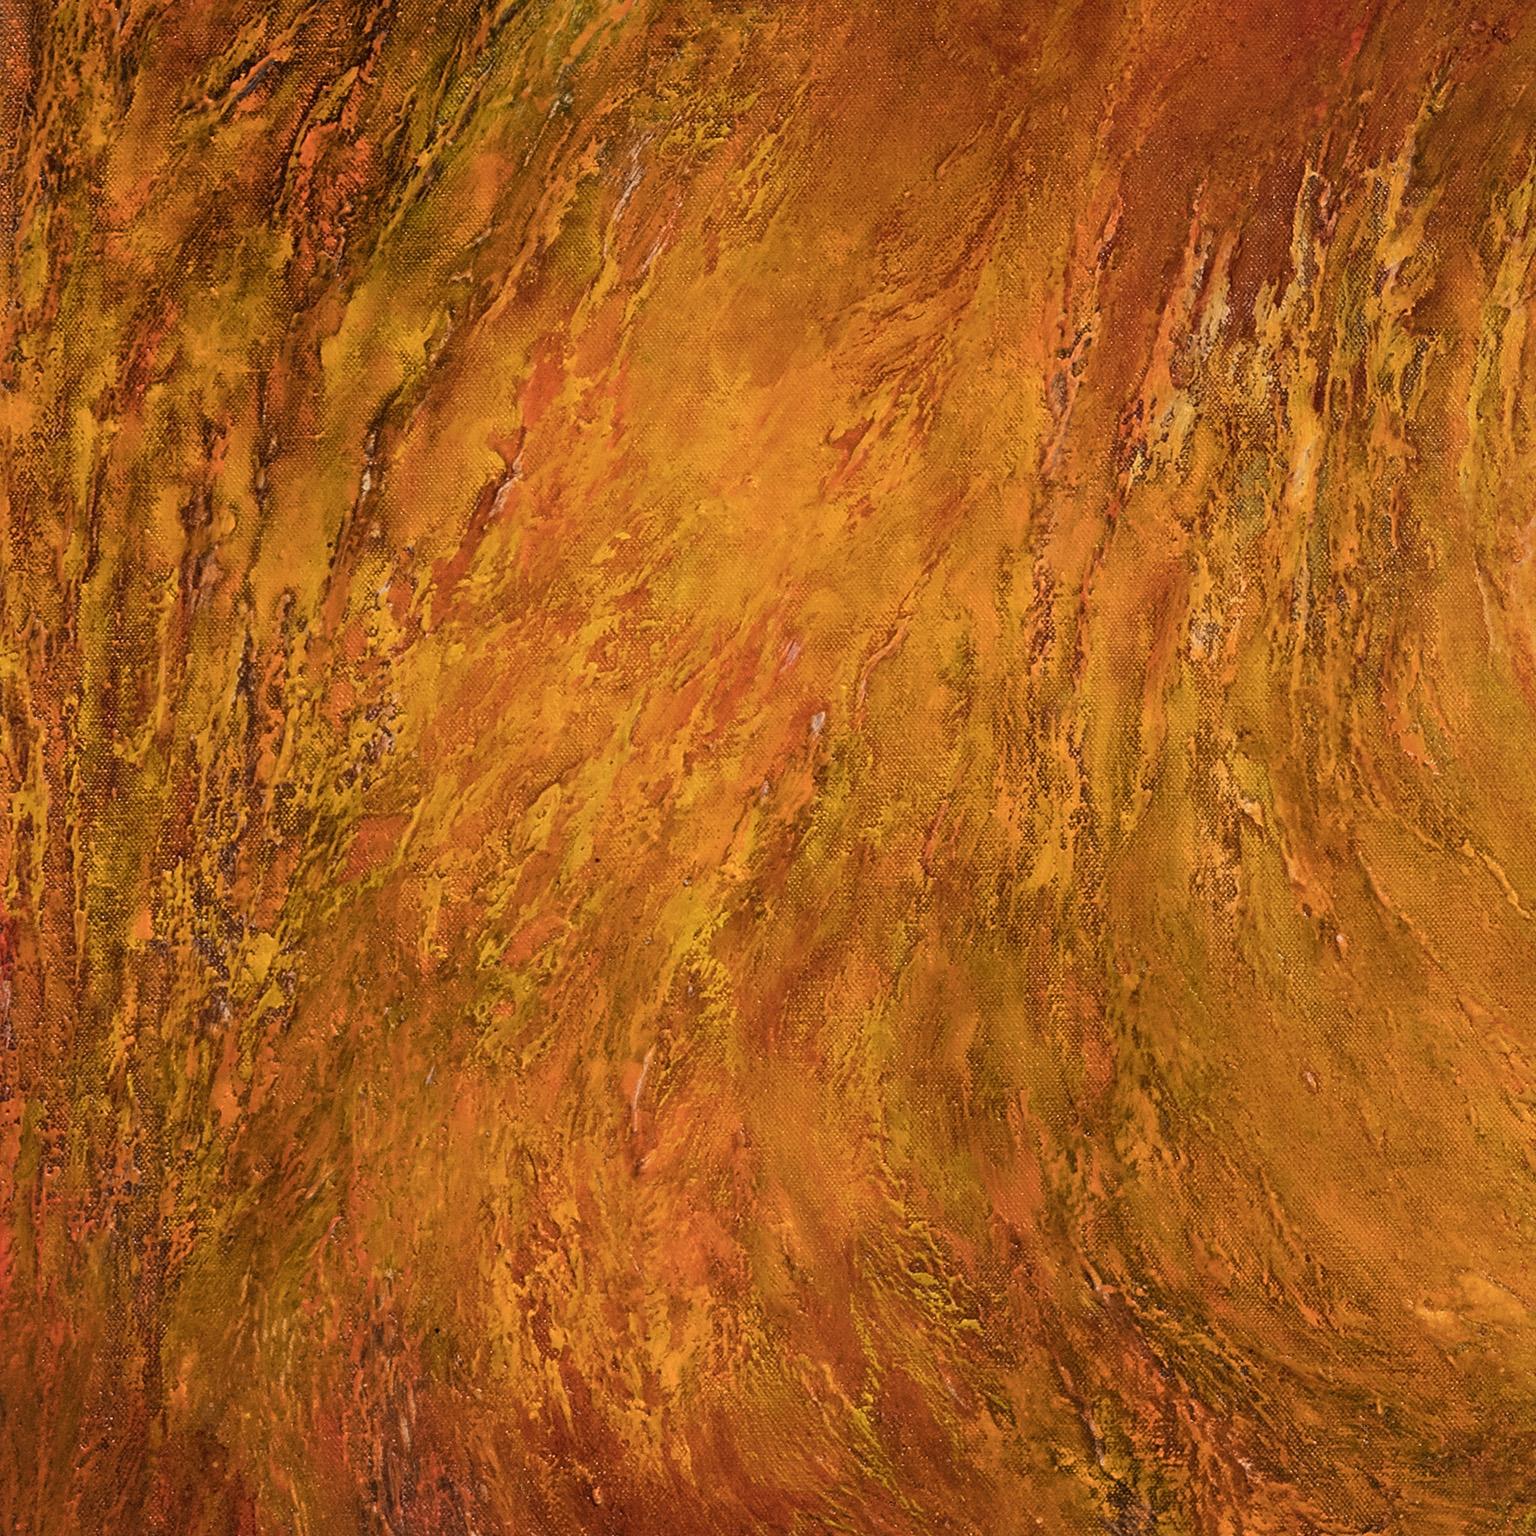 Occasus (Sunset) - Abstract Gestural Oil Painting with Red and Orange 1